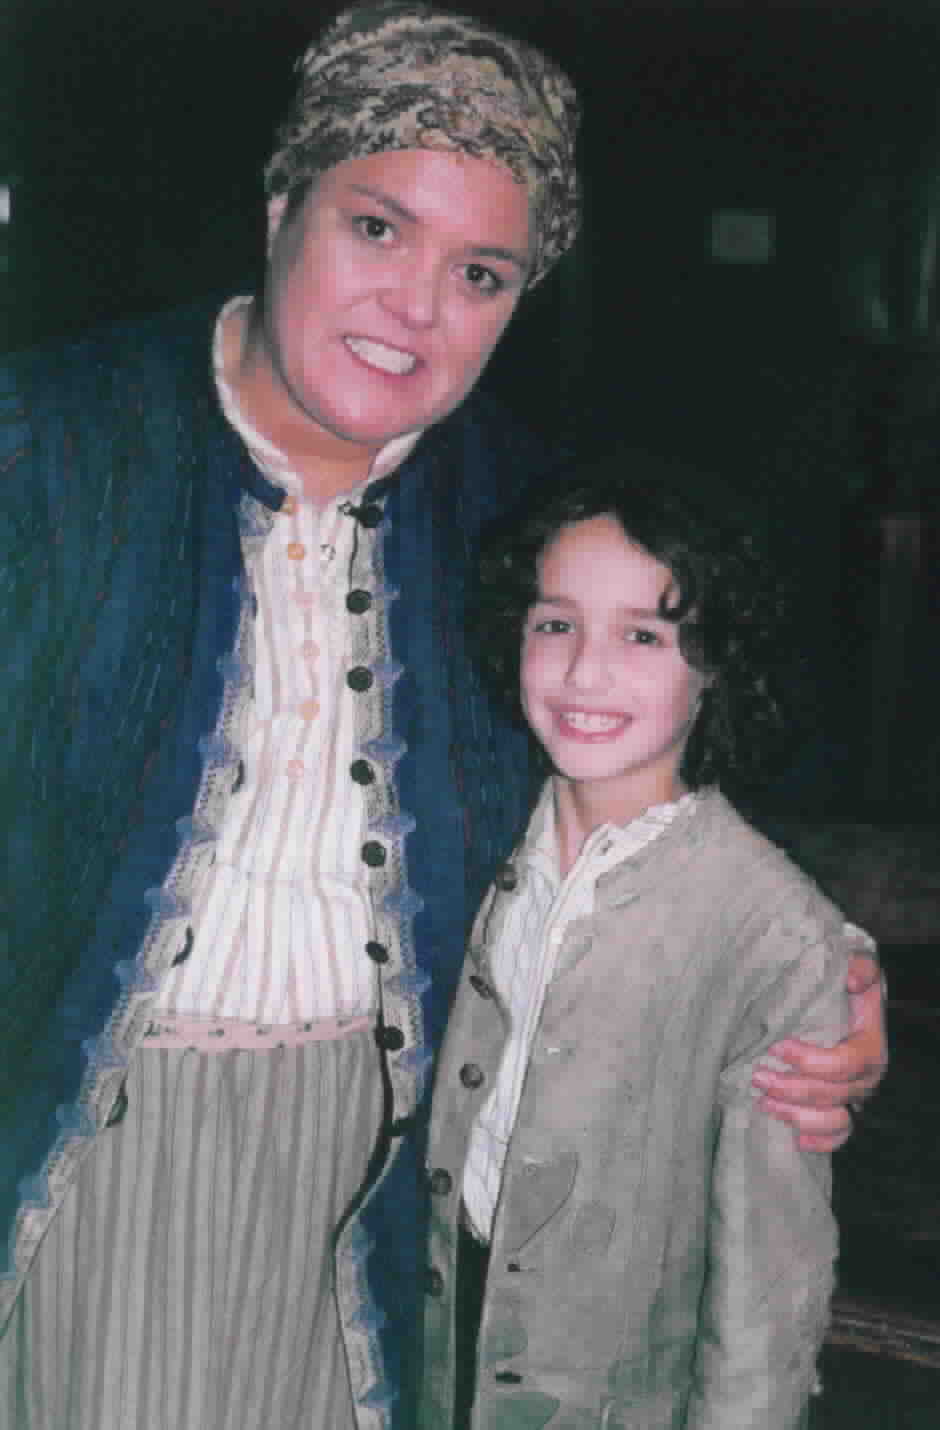 Michael and Rosie ODonnell back stage at Broadways Fiddler On The Roof